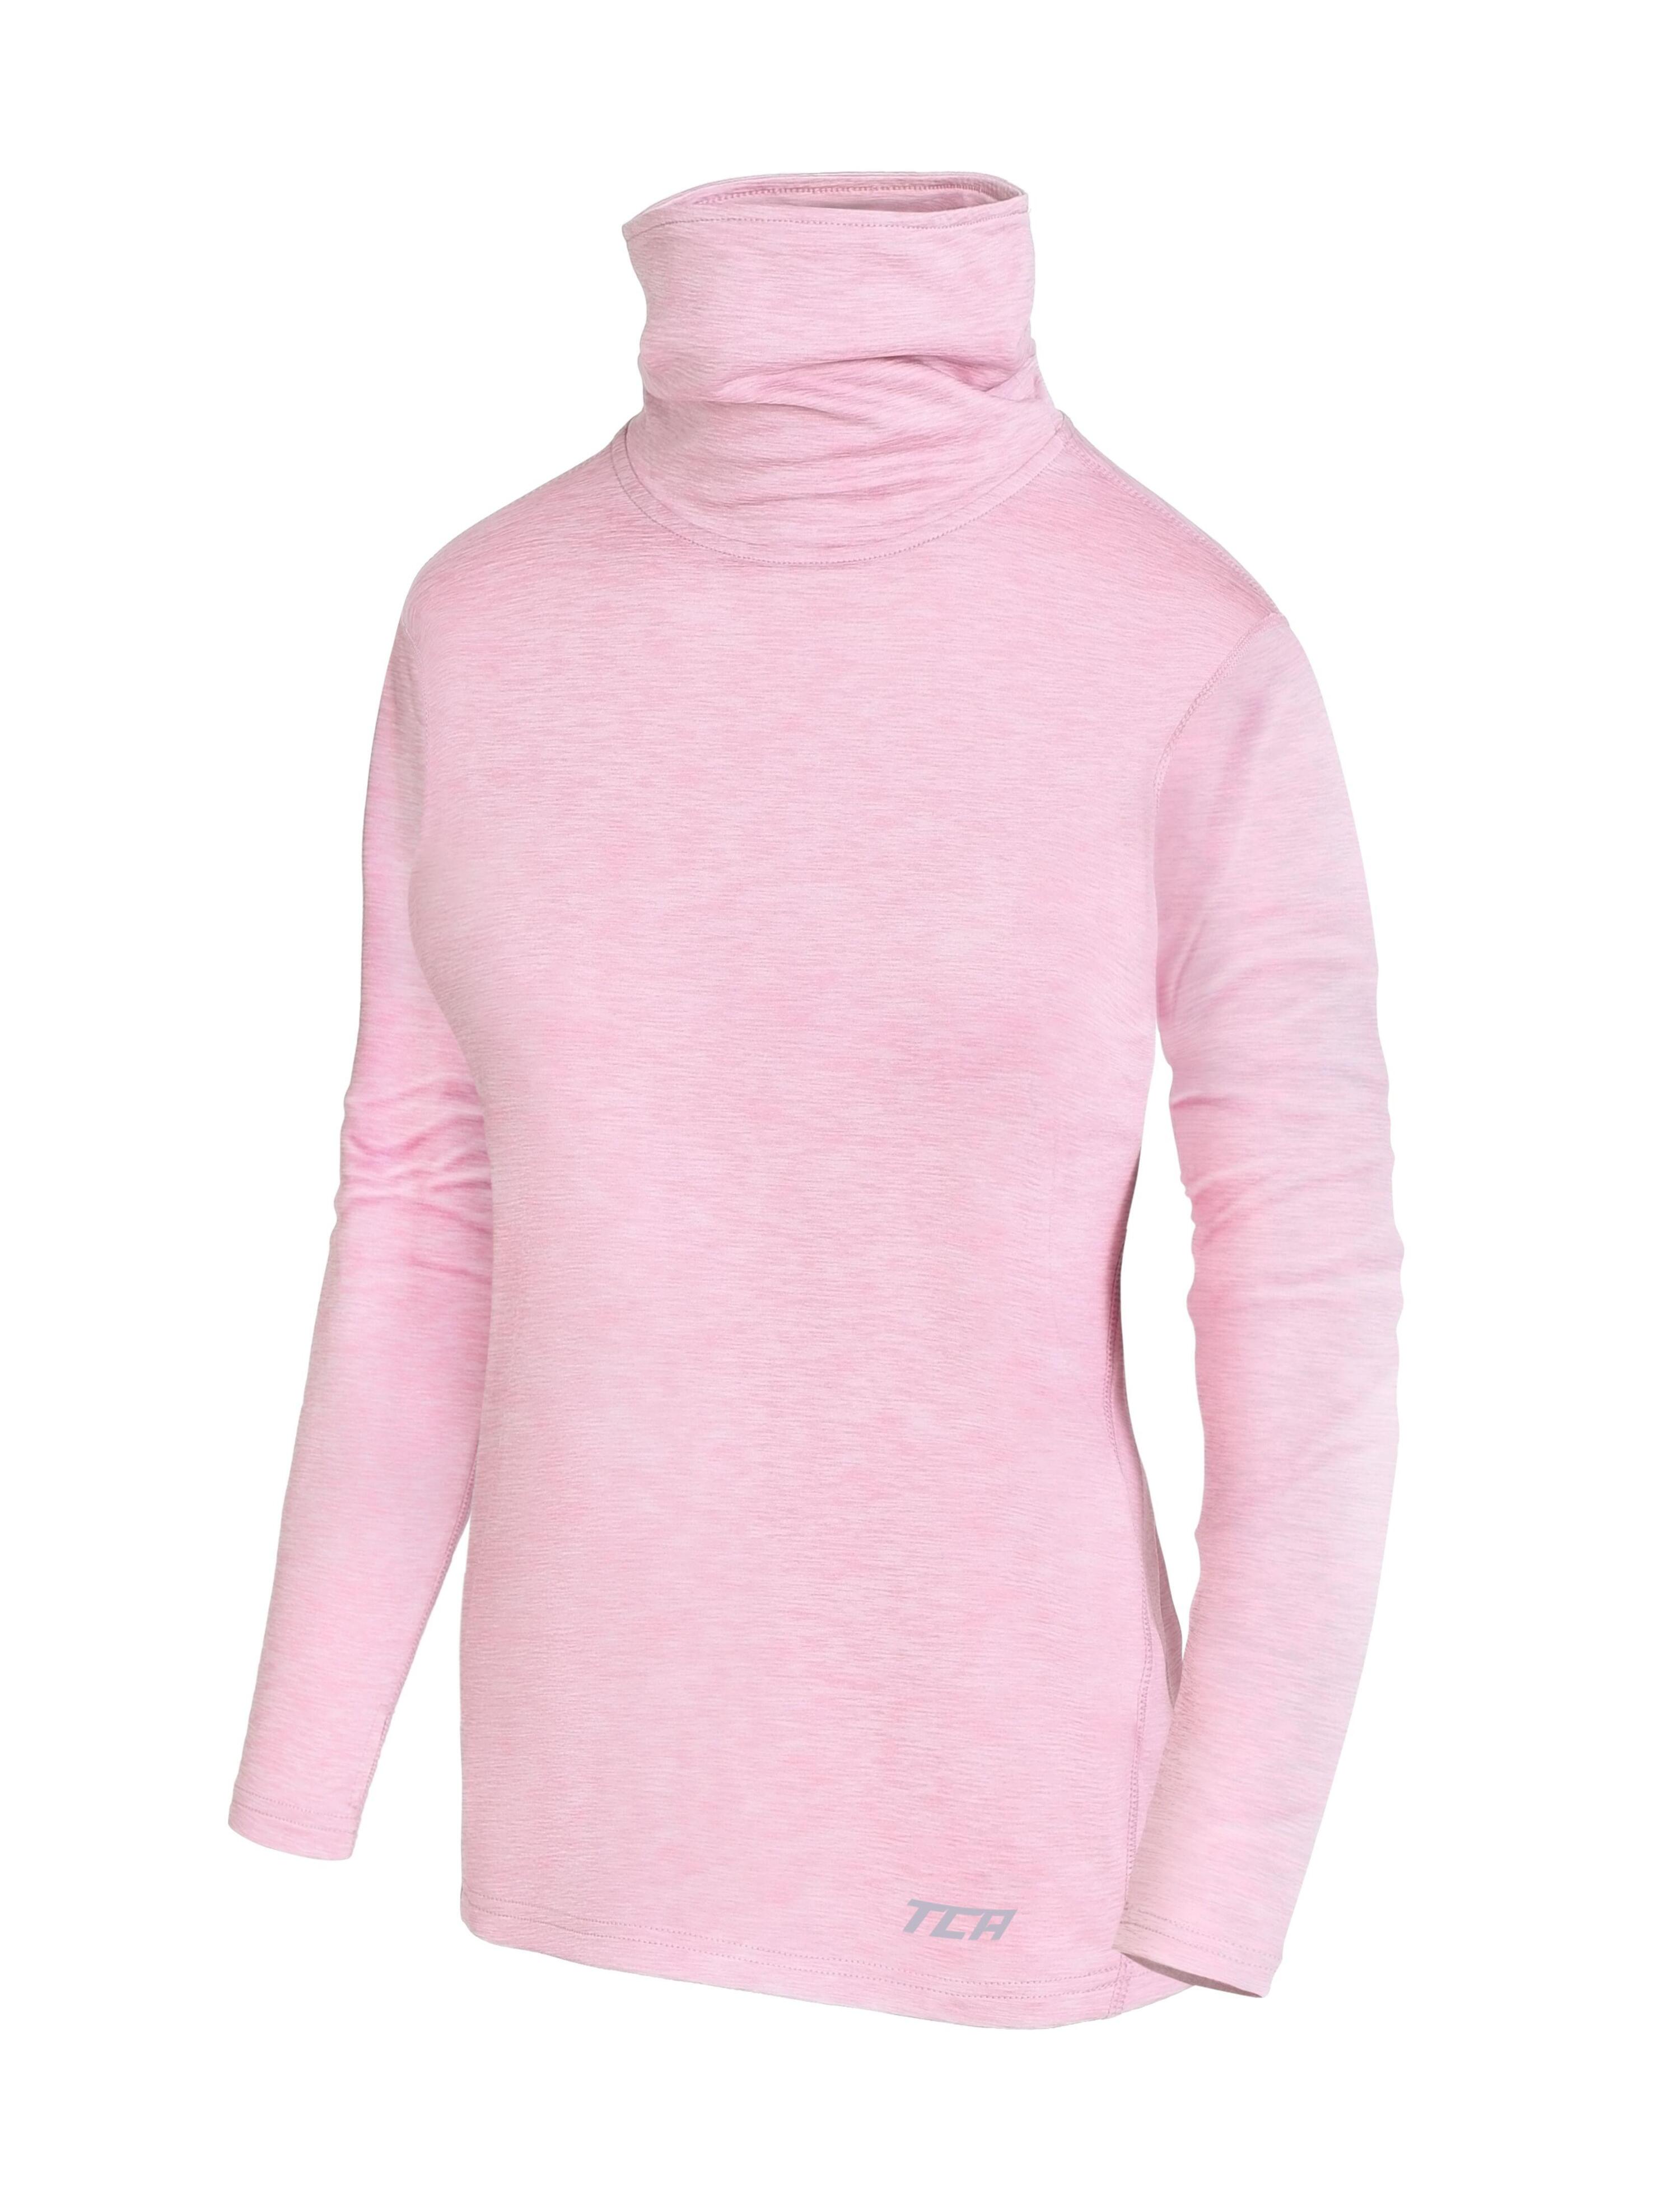 Girls' Thermal Funnel Neck Top - Sweet Lilac Marl 1/4